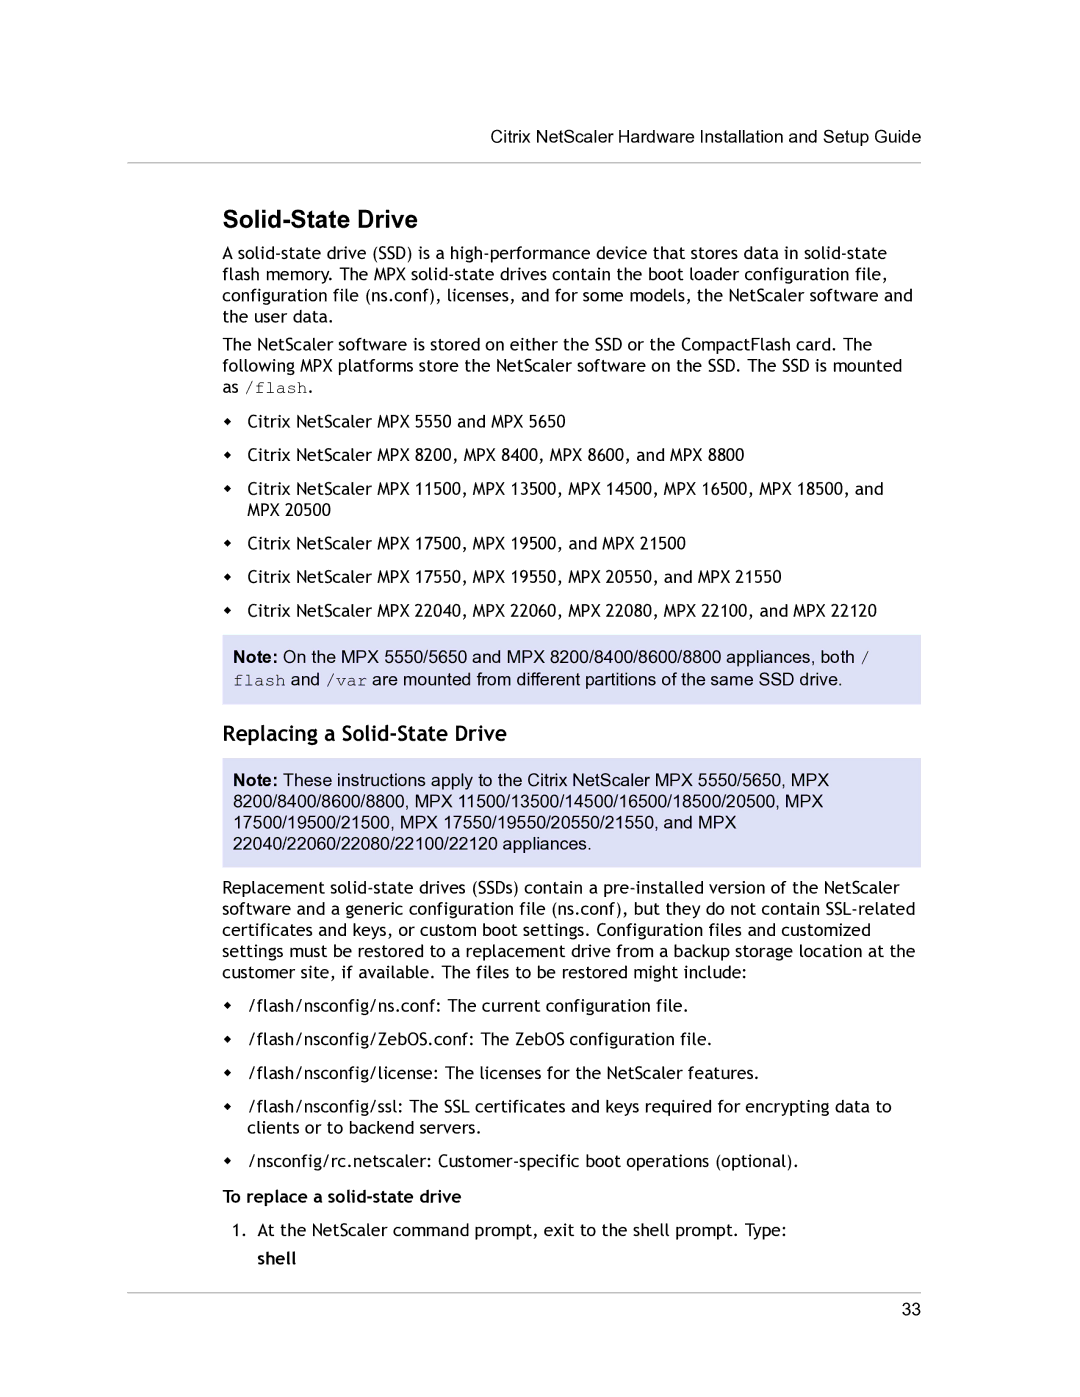 Citrix Systems 9.3 setup guide Solid-State Drive, To replace a solid-state drive 